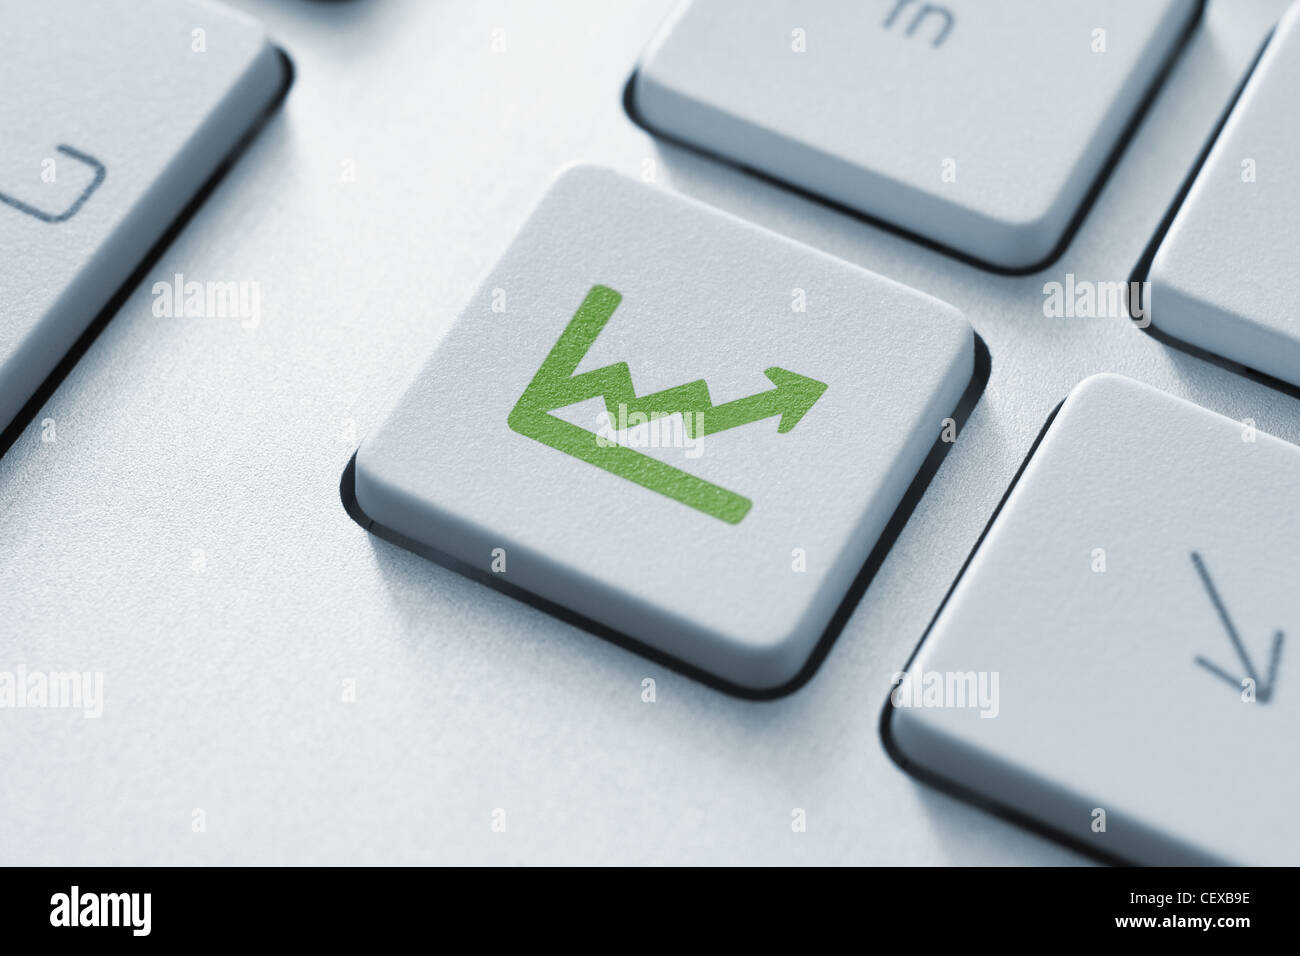 Investment button on the keyboard. Toned Image. Stock Photo